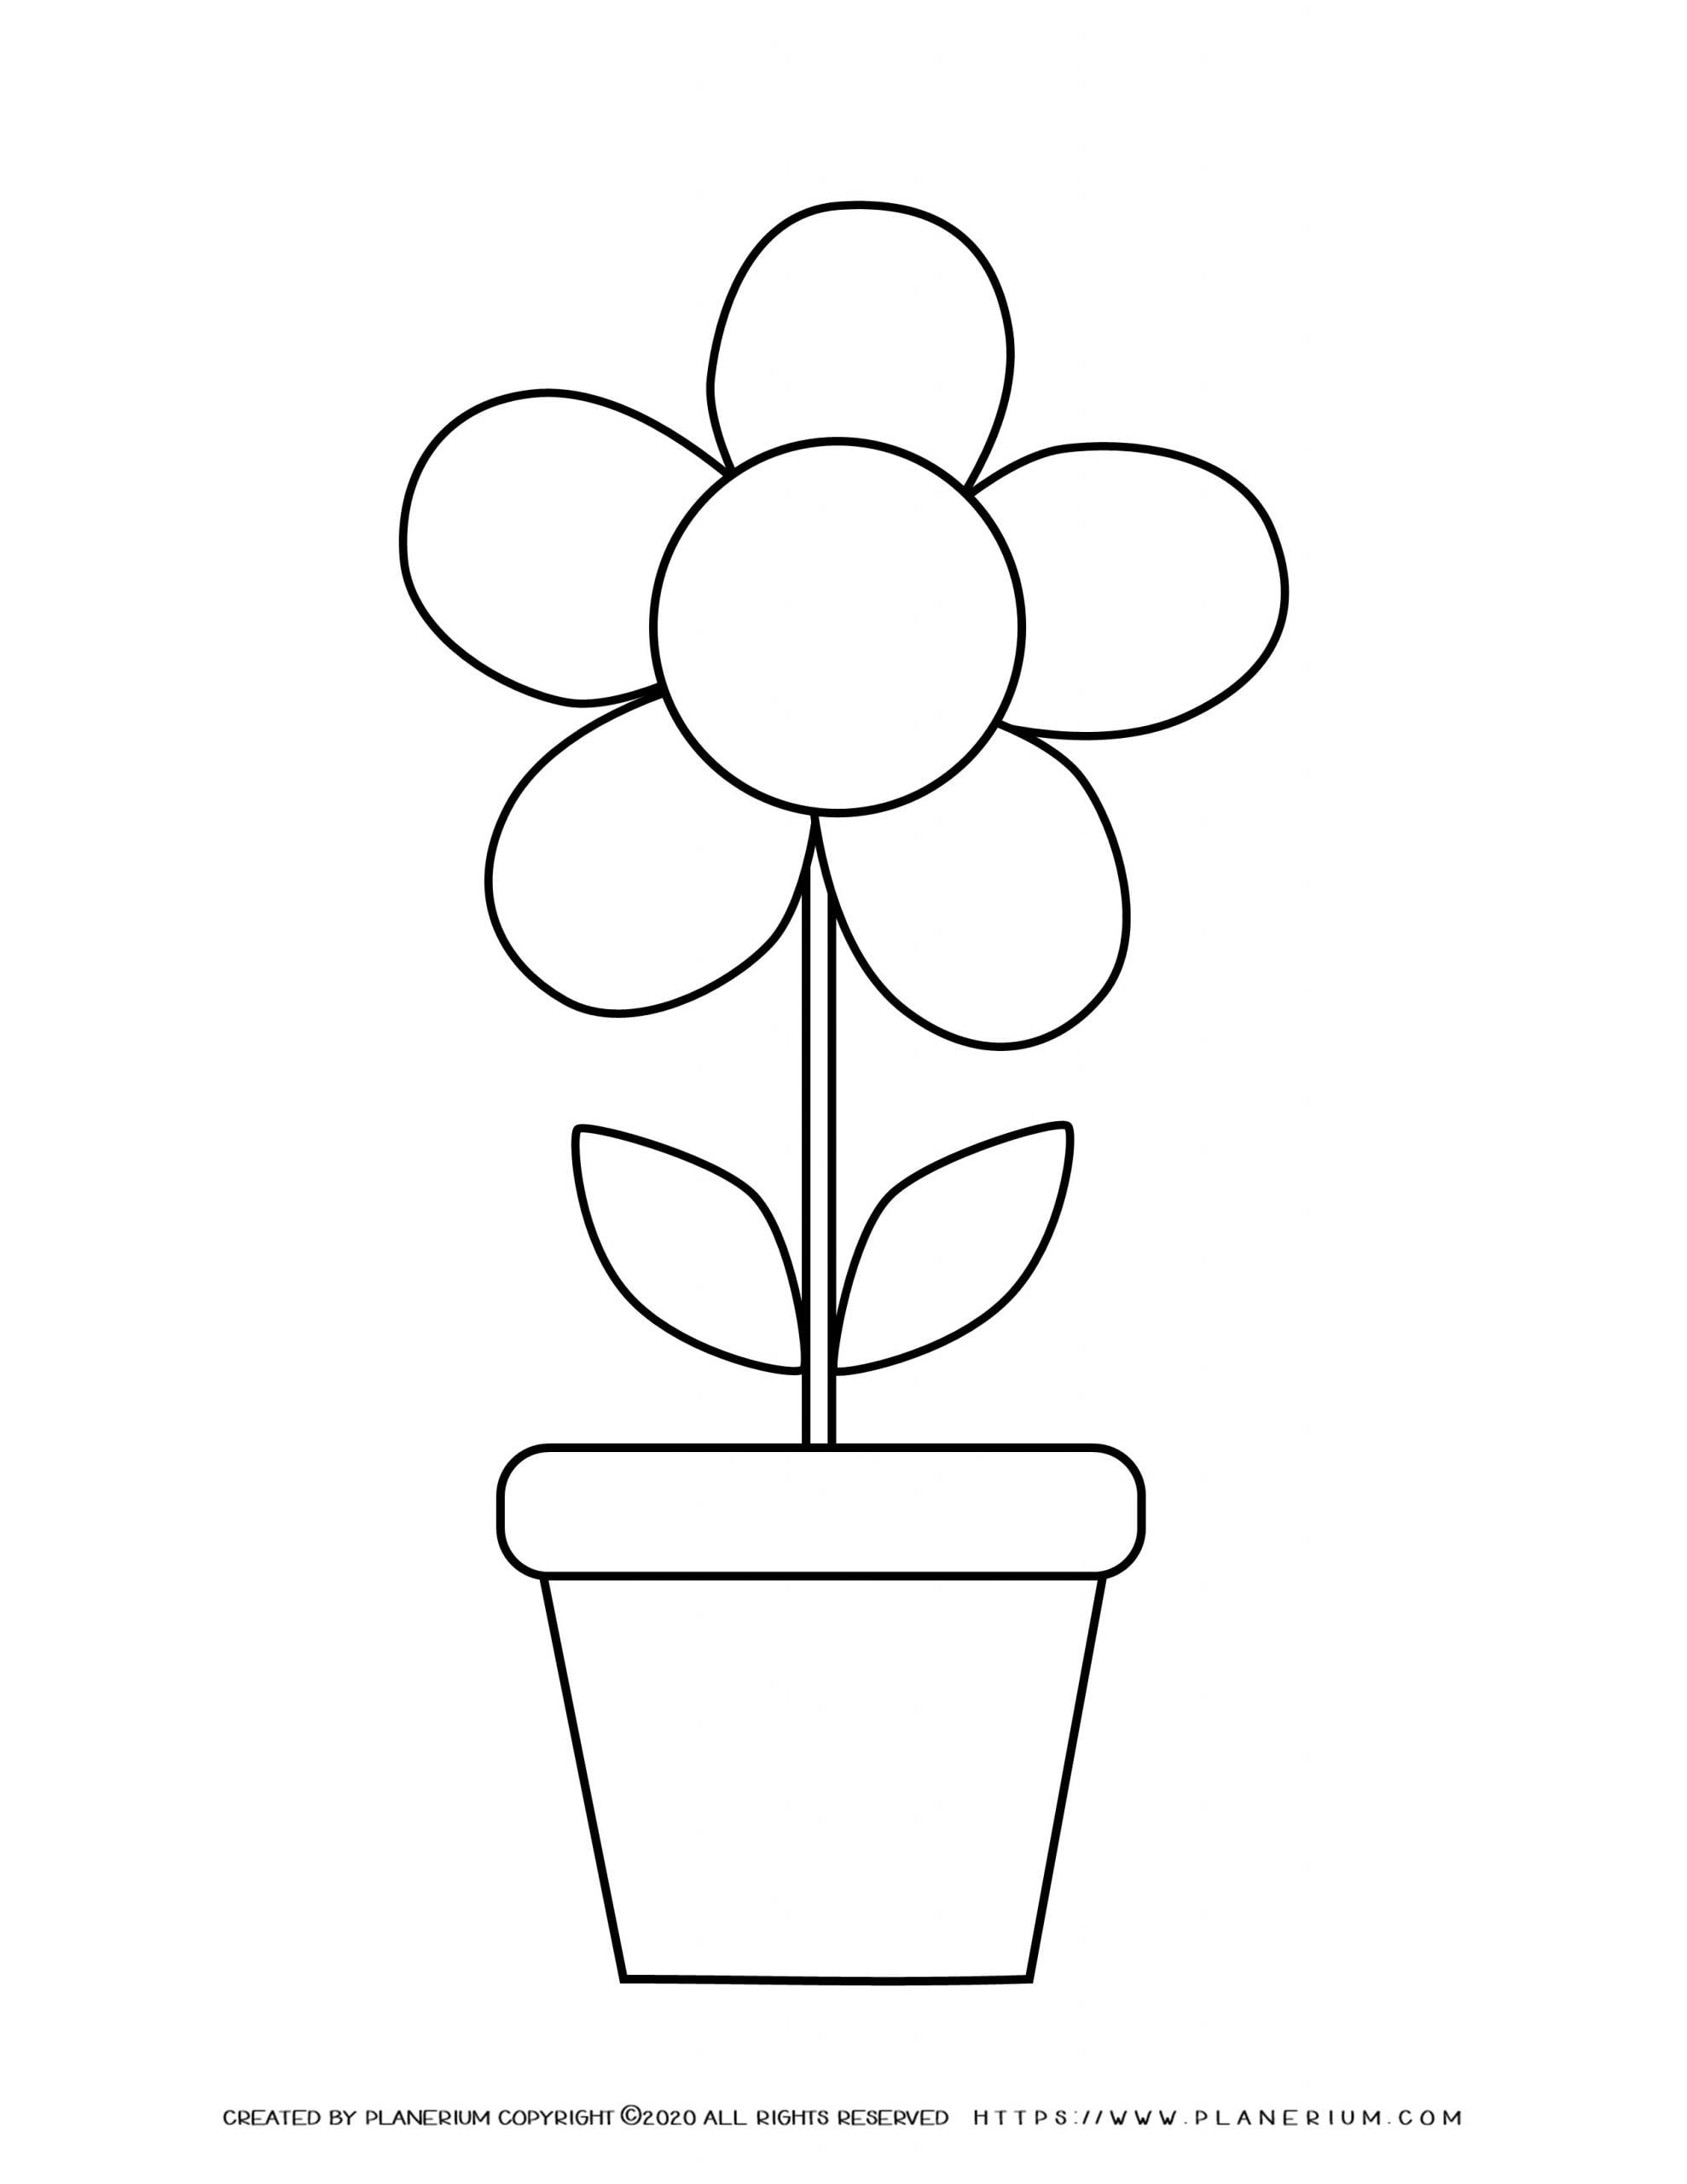 Spring   Coloring page   Flower in a Pot   Planerium